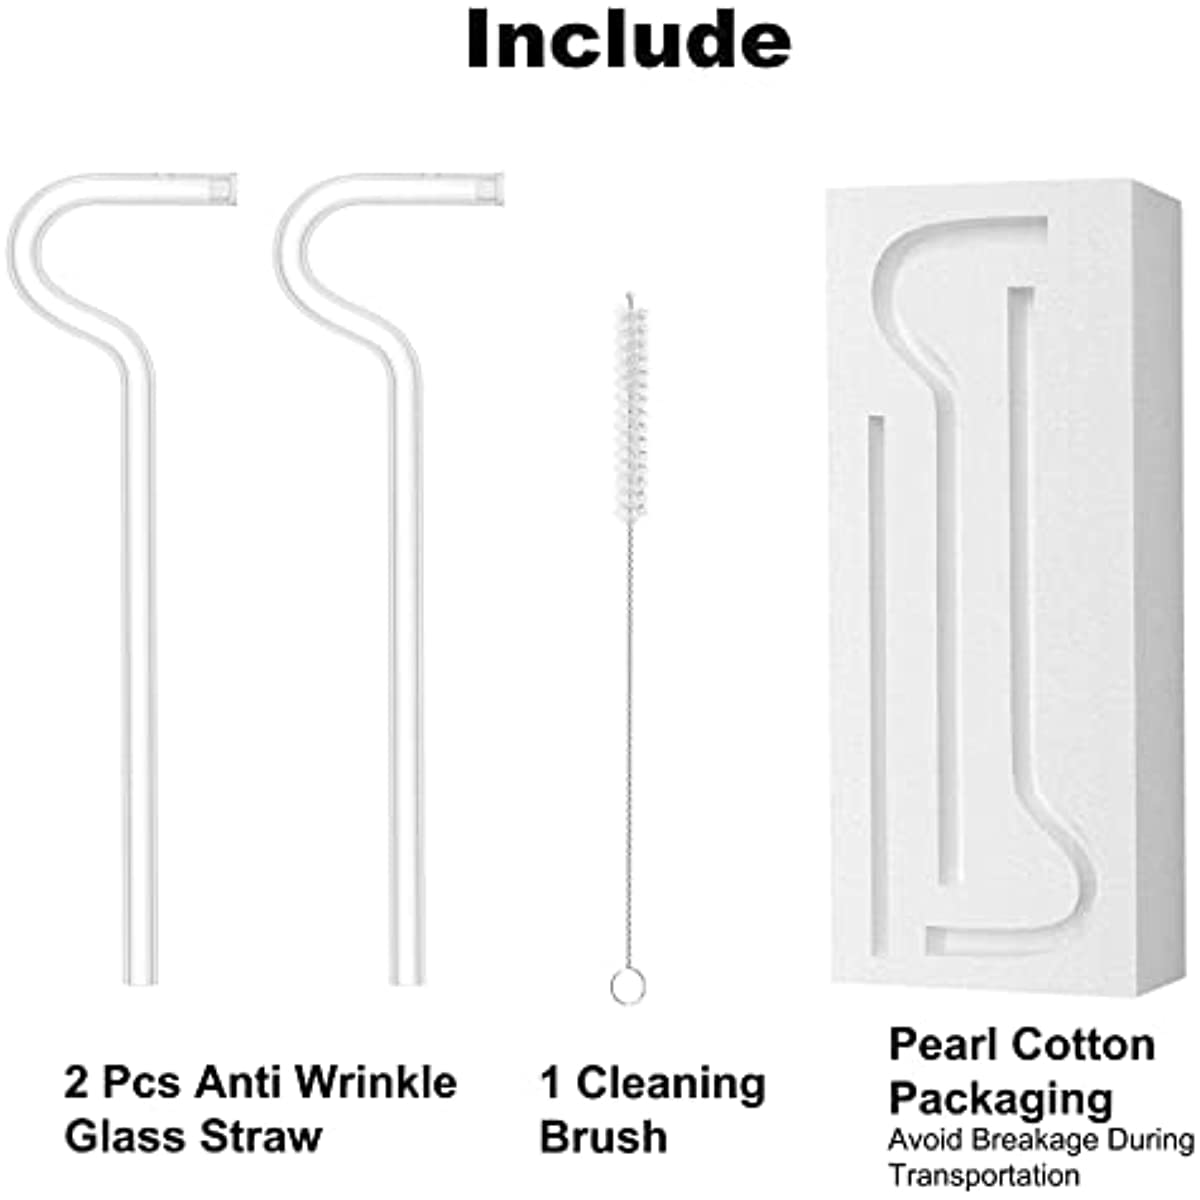 2pcs Anti Wrinkle Straw Reusable Glass Straw For Stanley Cup Anti